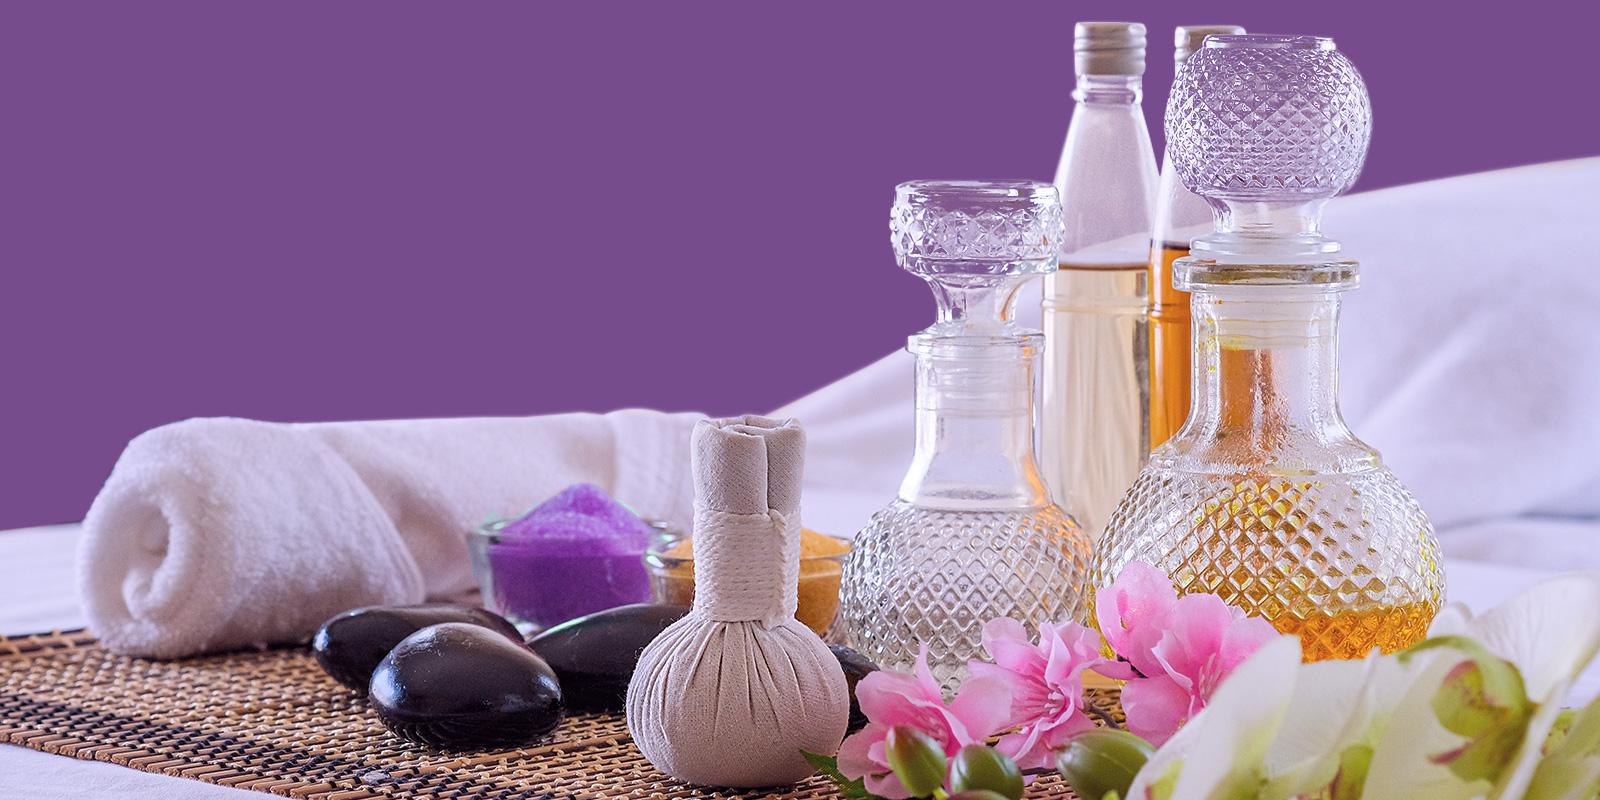 Home massage services in Riyadh: a unique experience of relaxation and comfort in your own home